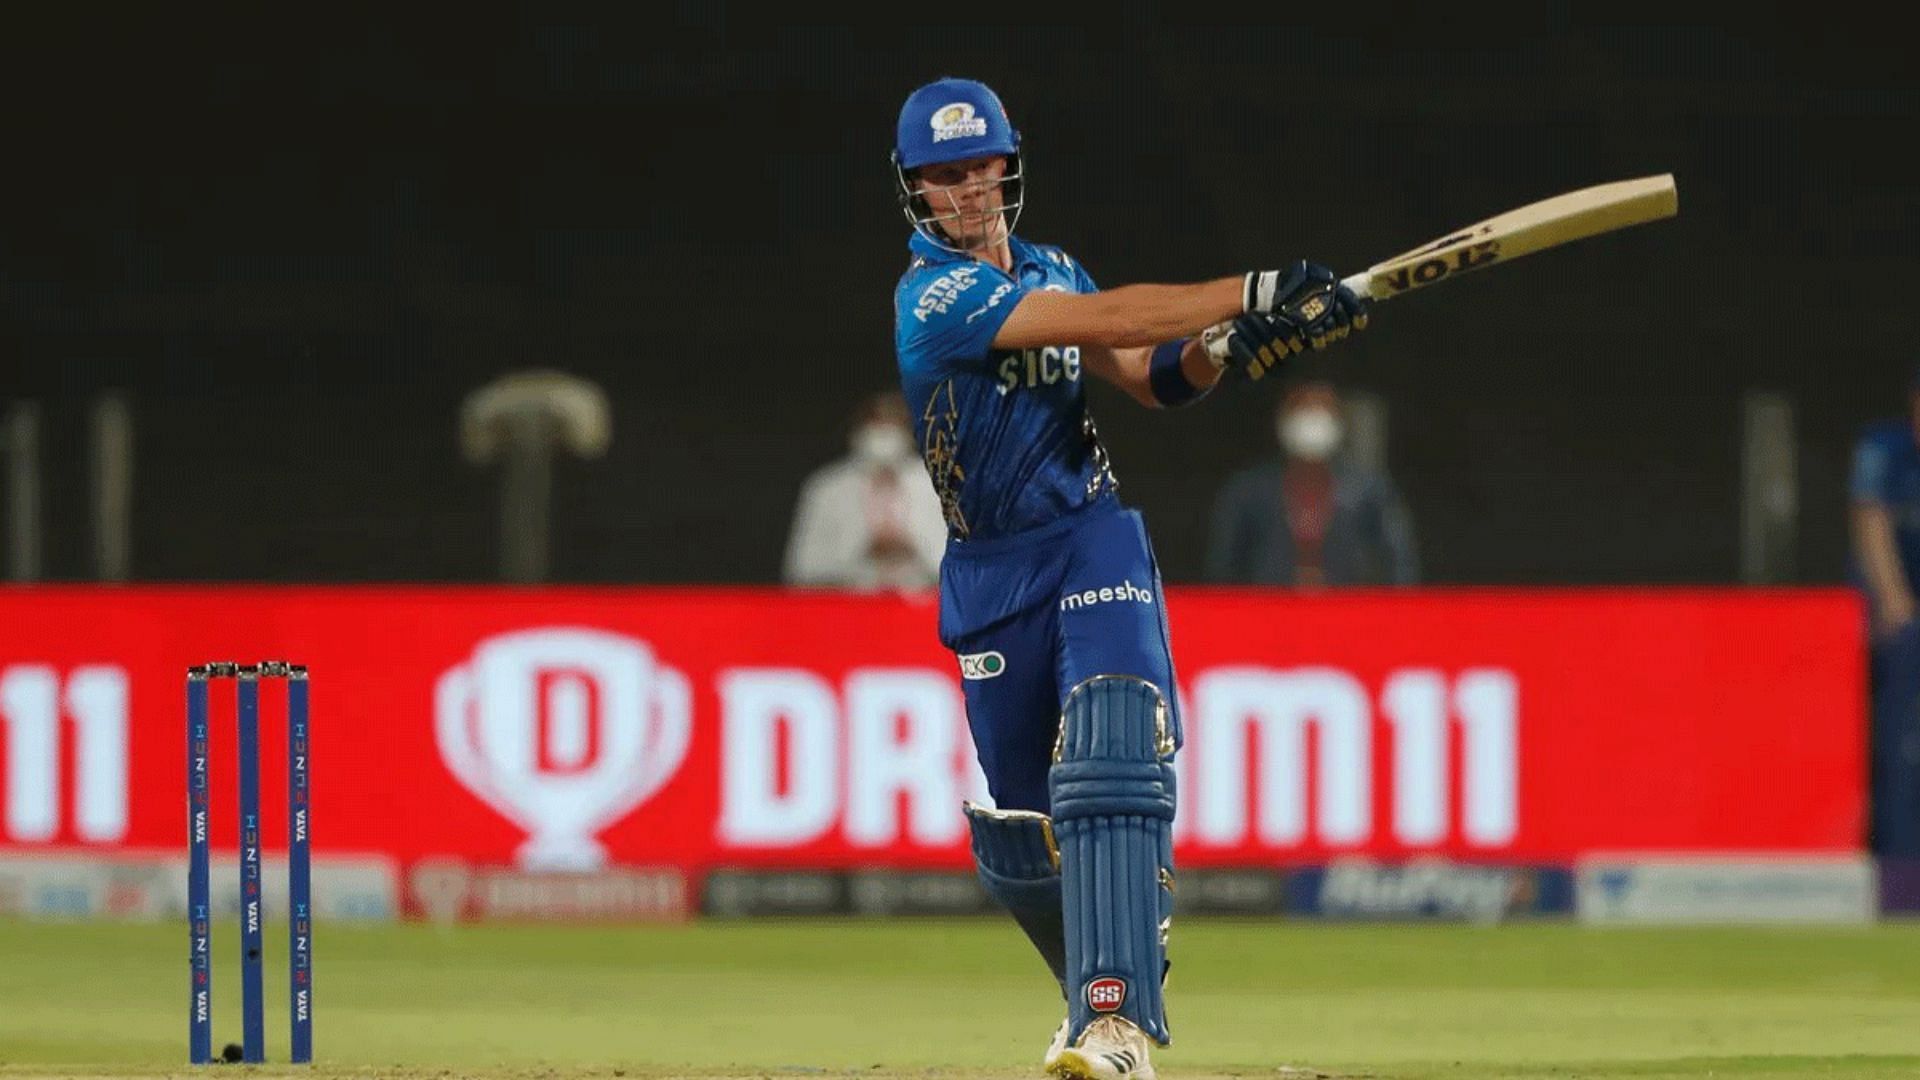 Dewald Brevis is likely to become a future superstar for MI and South Africa (P.C.:X)